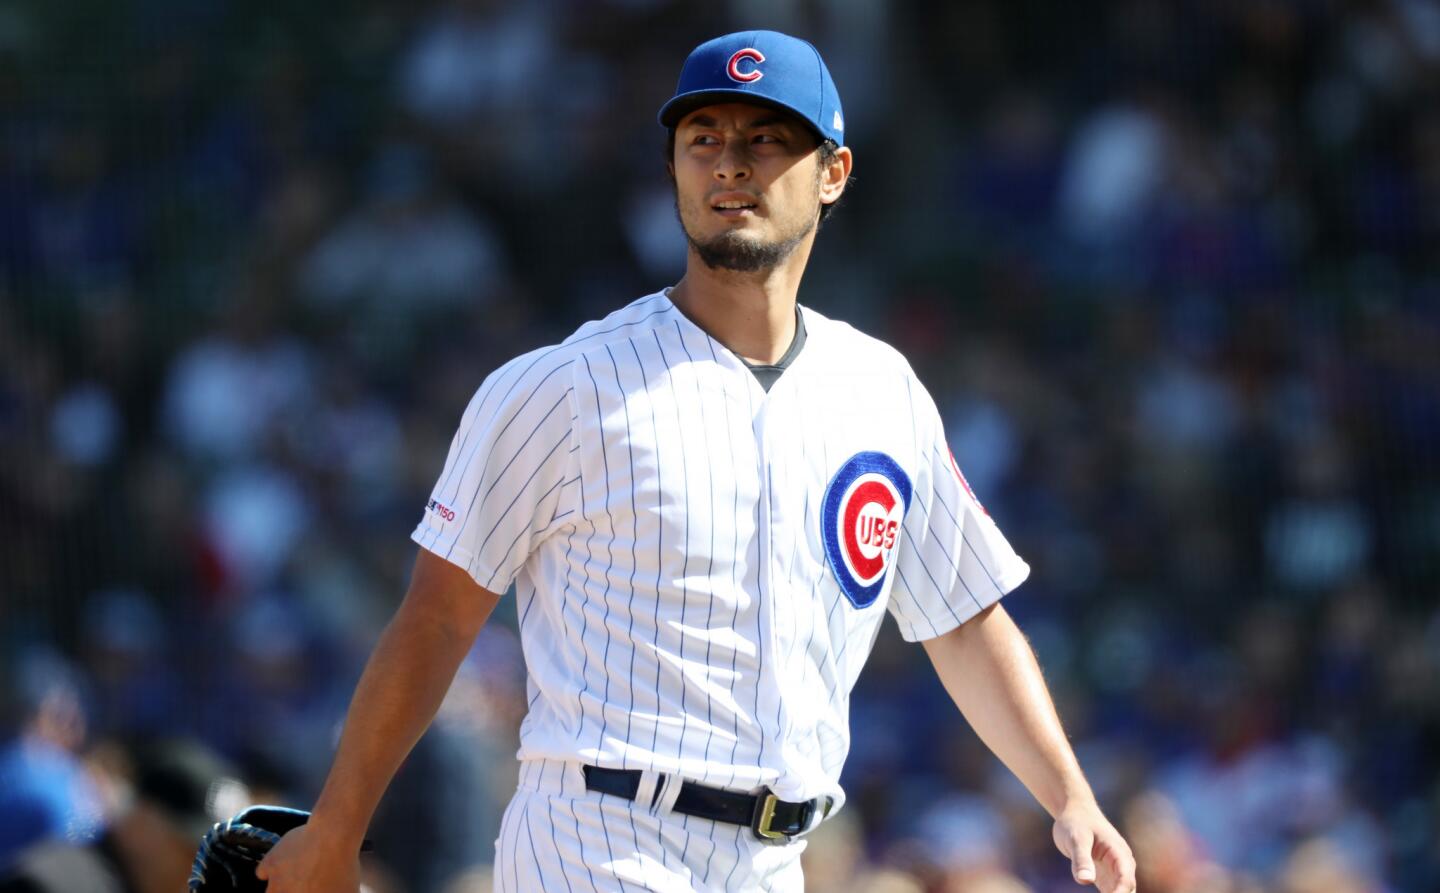 Cubs starter Yu Darvish looks at the video board after throwing the second inning against the Cardinals at Wrigley Field on Saturday, May 4, 2019.